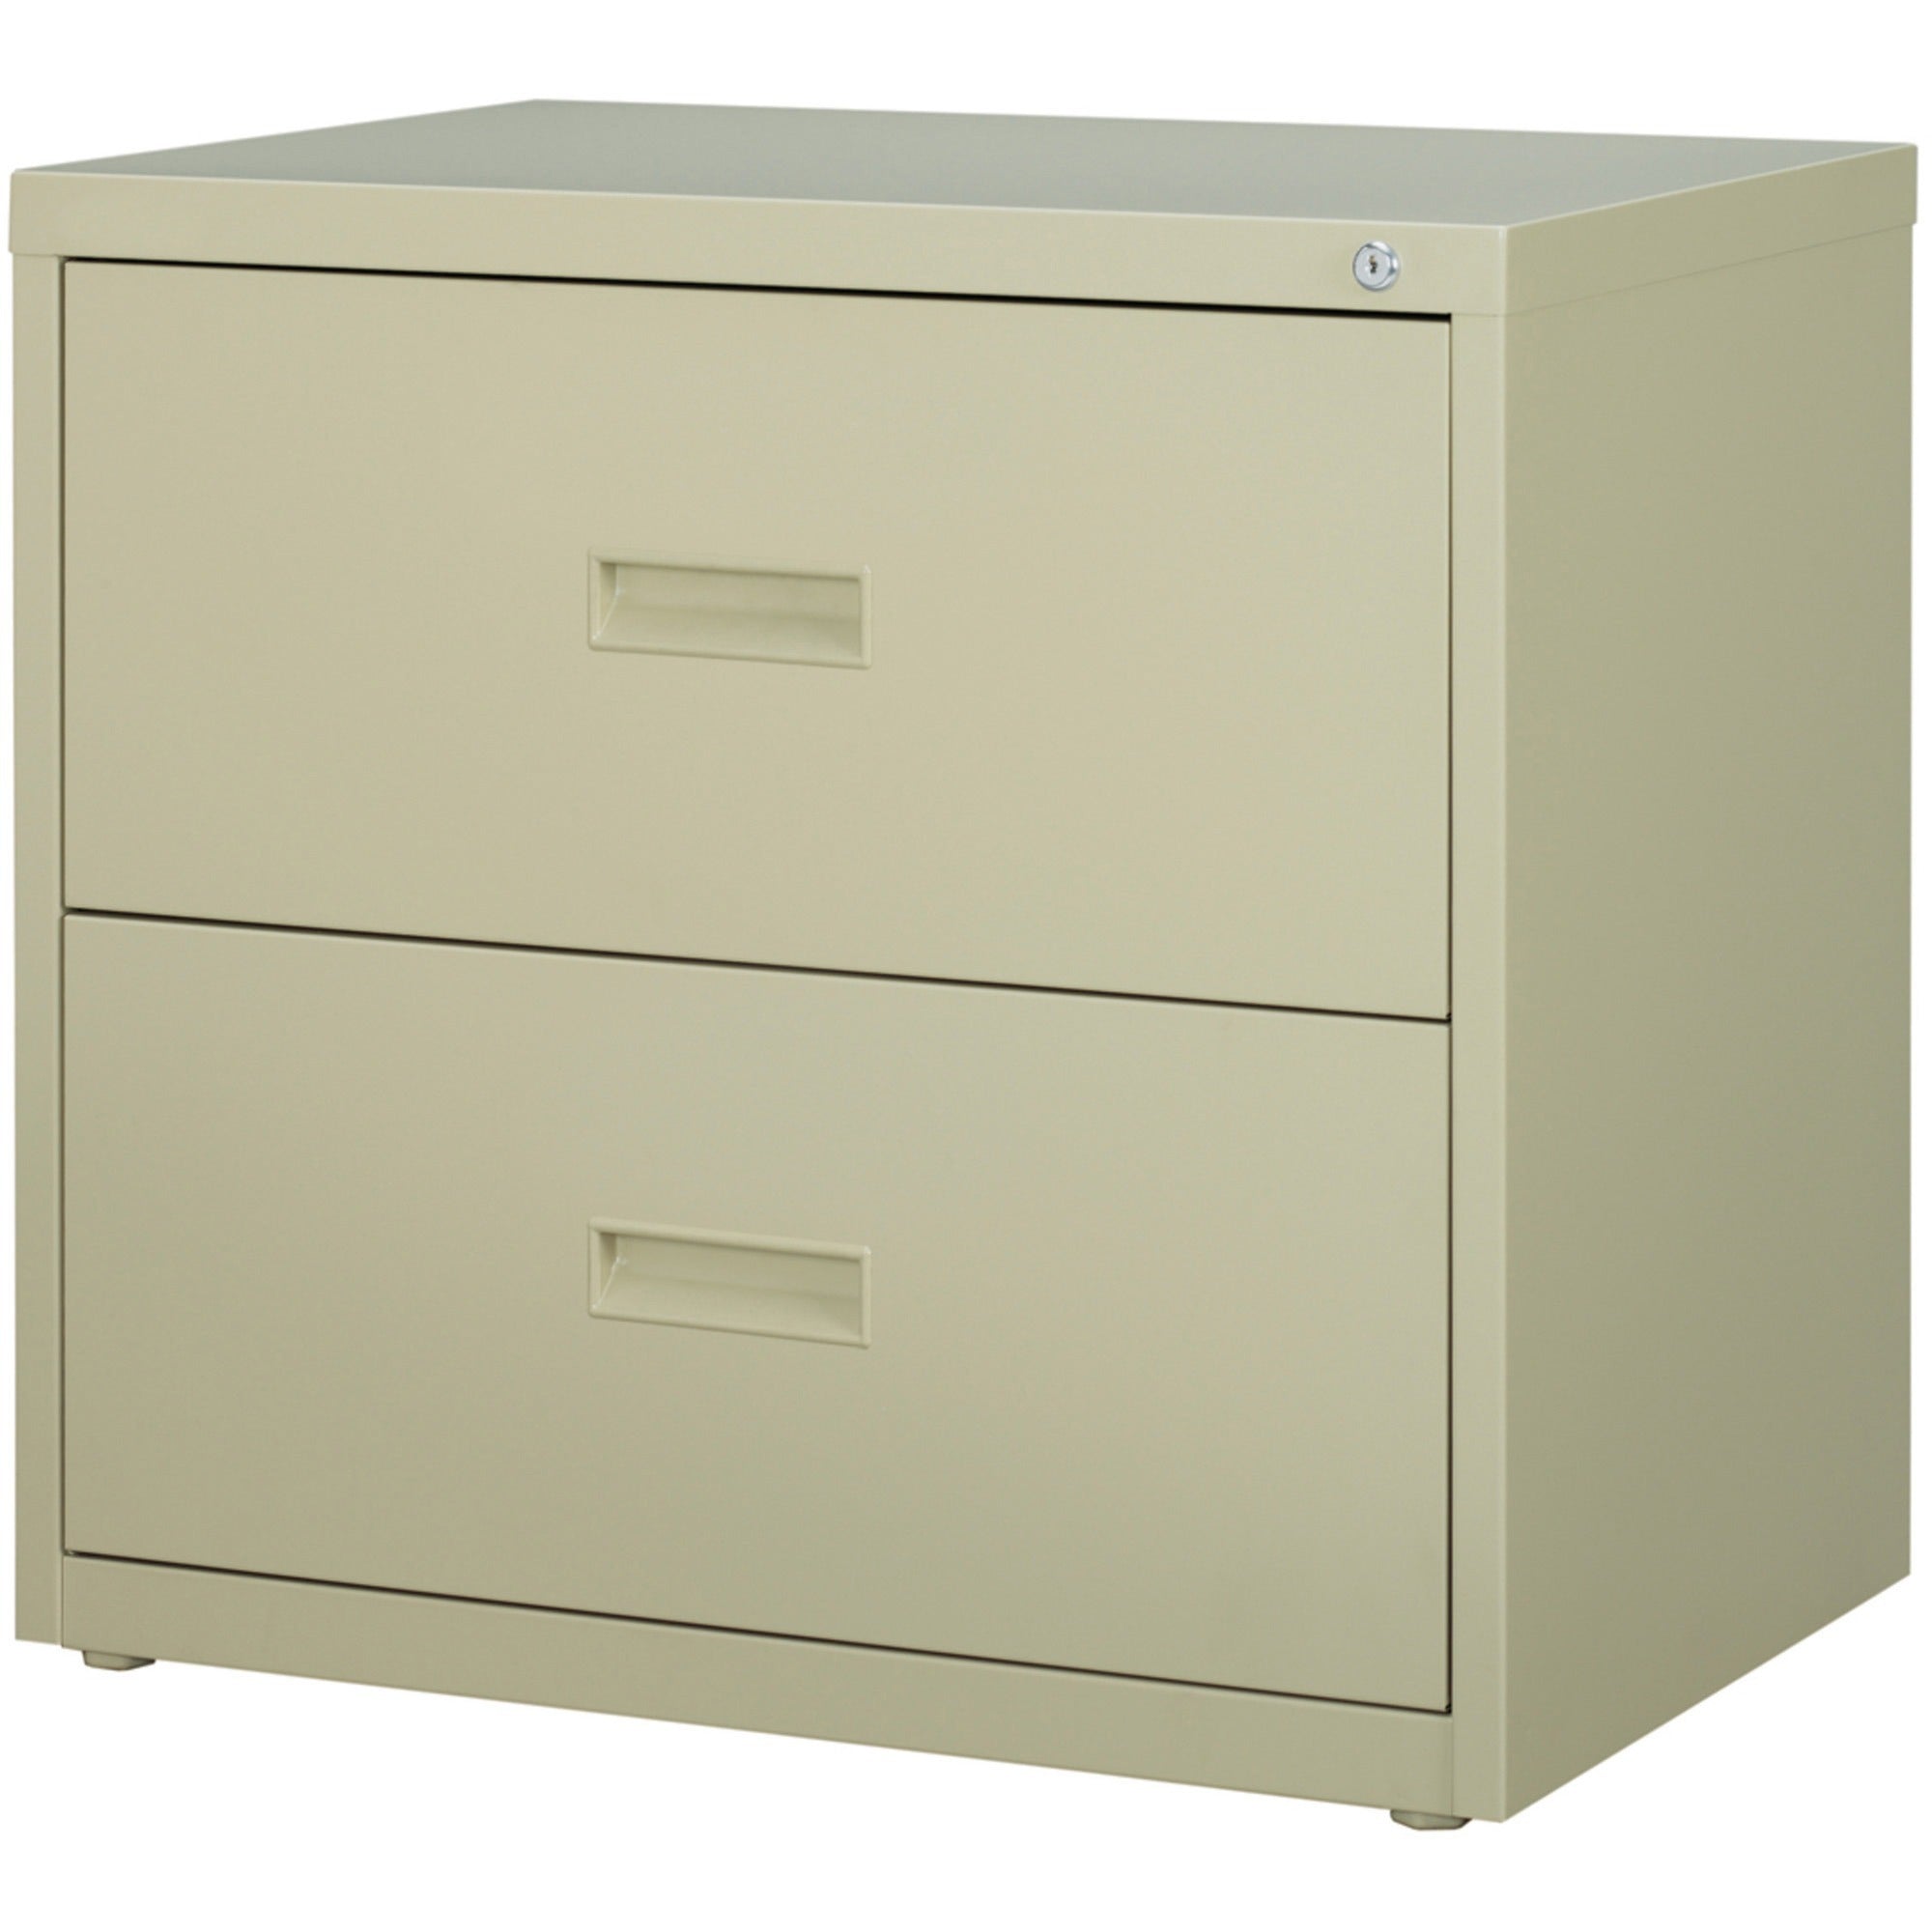 Lorell Value Lateral File - 2-Drawer - 30" x 18.6" x 28.1" - 2 x Drawer(s) for File - A4, Letter, Legal - Interlocking, Ball-bearing Suspension, Adjustable Glide, Locking Drawer - Putty - Steel - Recycled - 